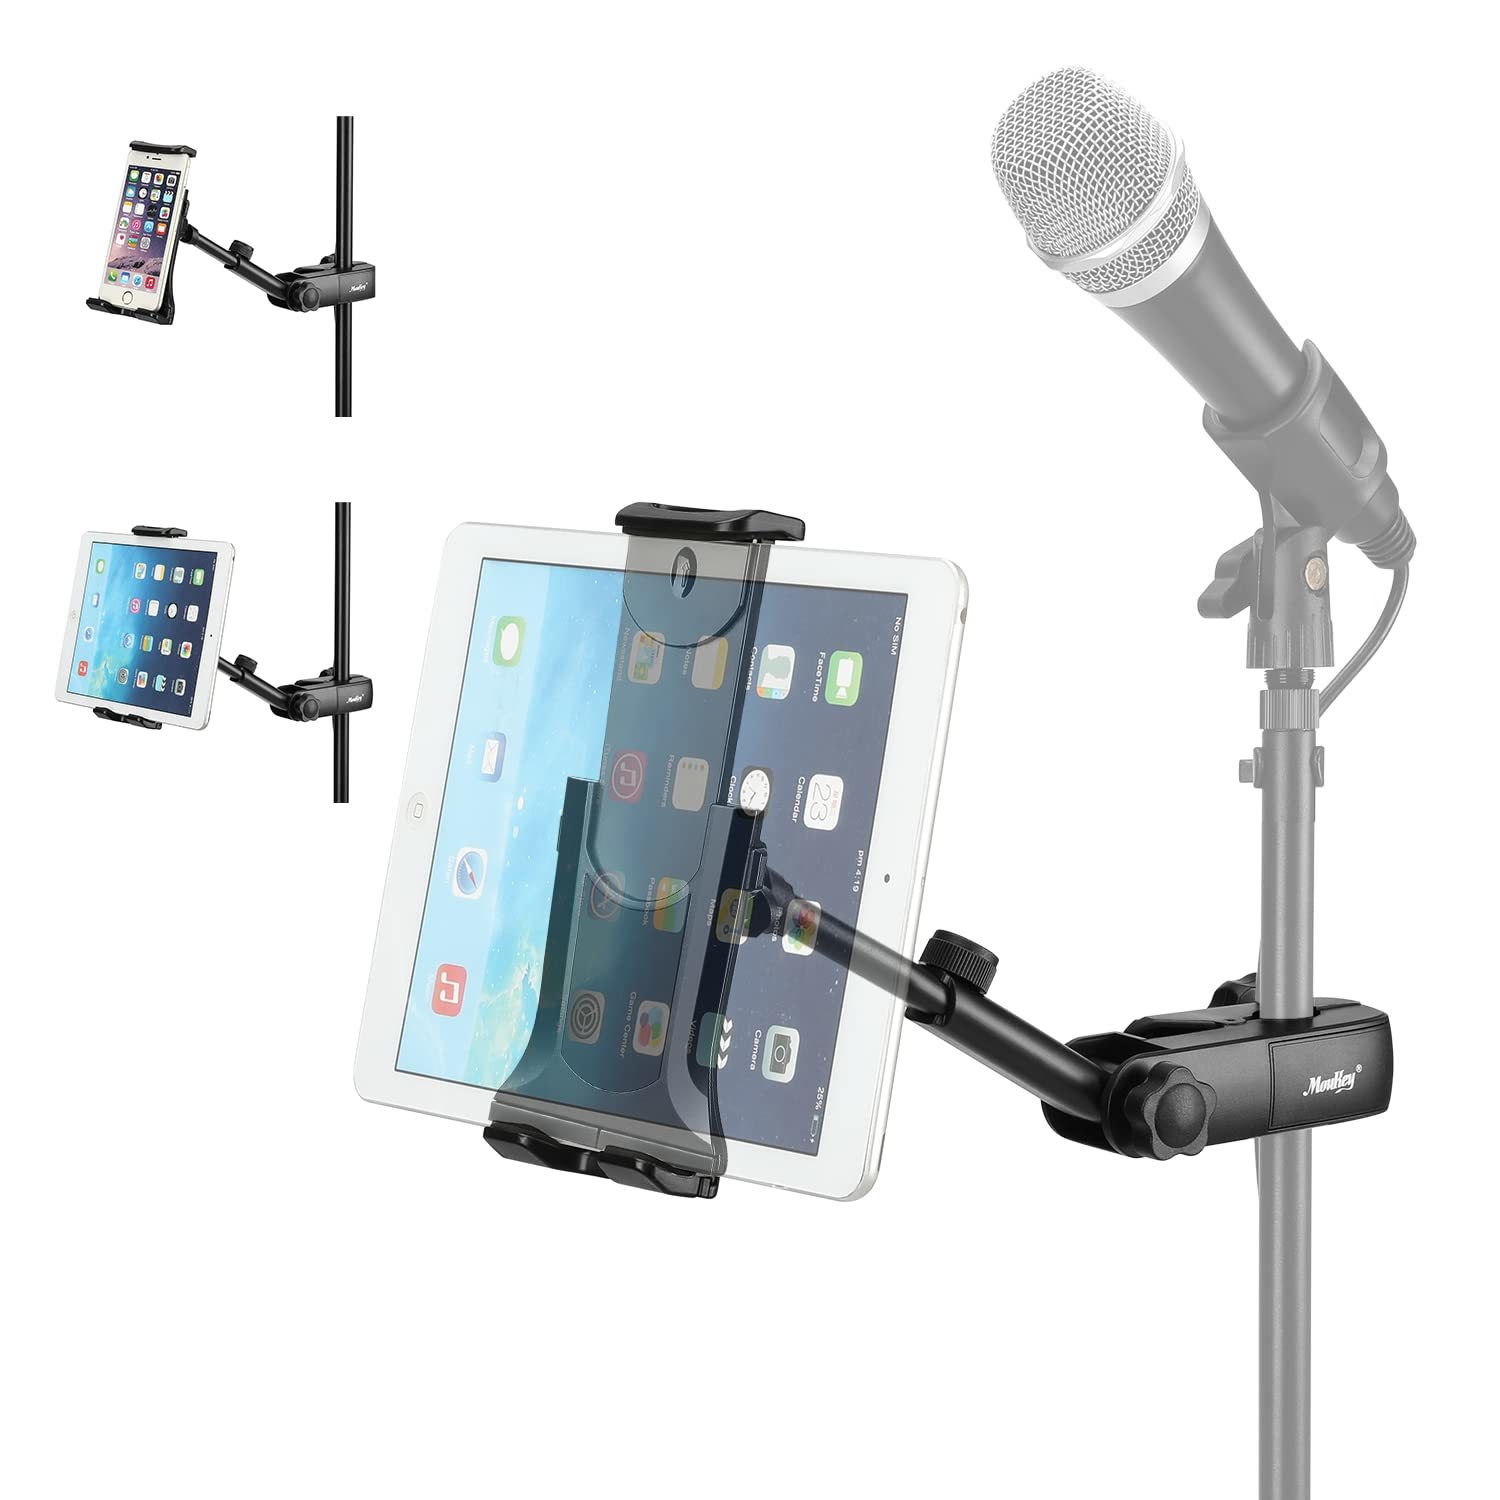 Tablet Holder For Mic Stand, Adjustable Microphone Music Stand Phone Holder Moun - $39.99